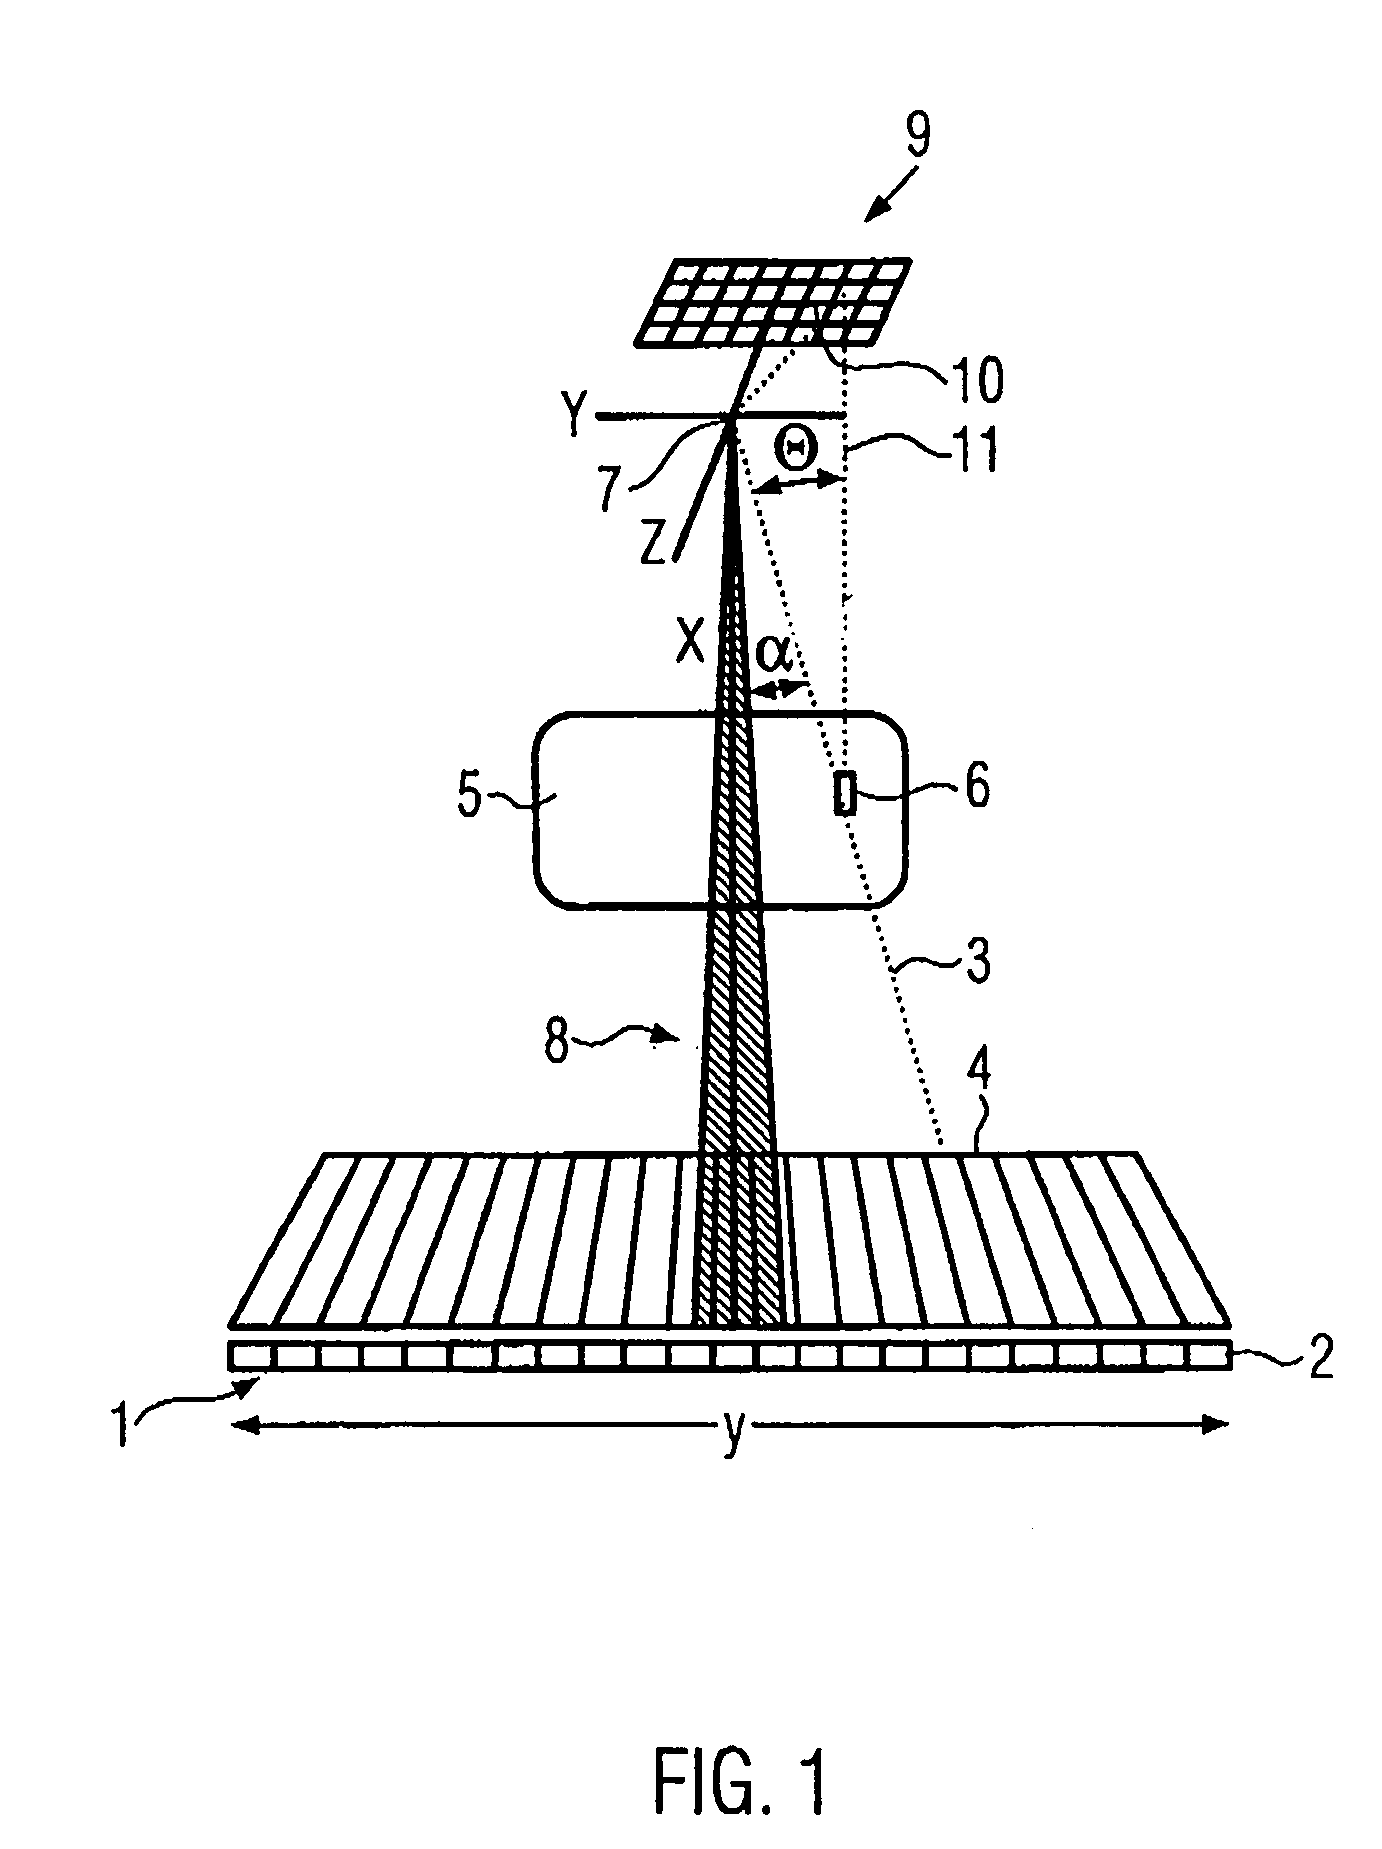 Method of measuring the momentum transfer spectrum of elastically scattered X-ray quanta